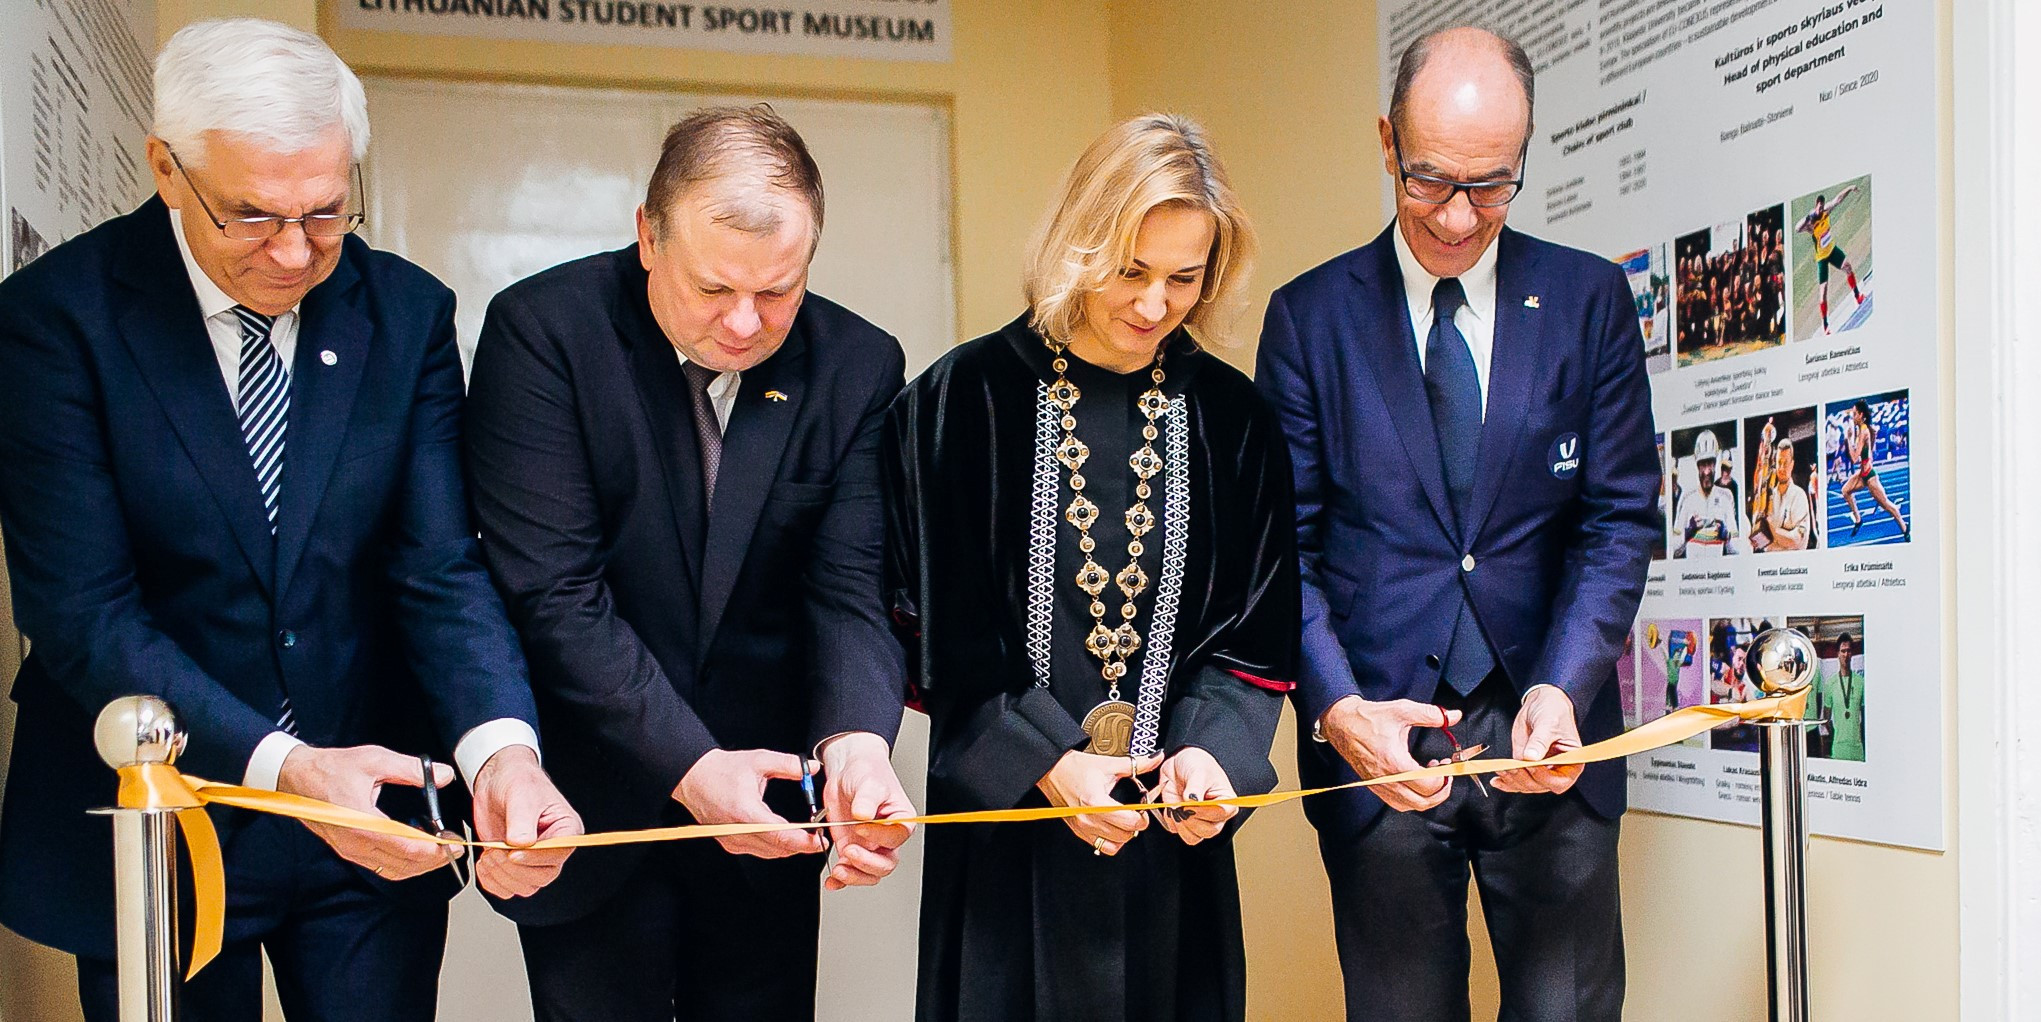 The Lithuanian National Students Sports Museum has been opened in Kaunas ©FISU